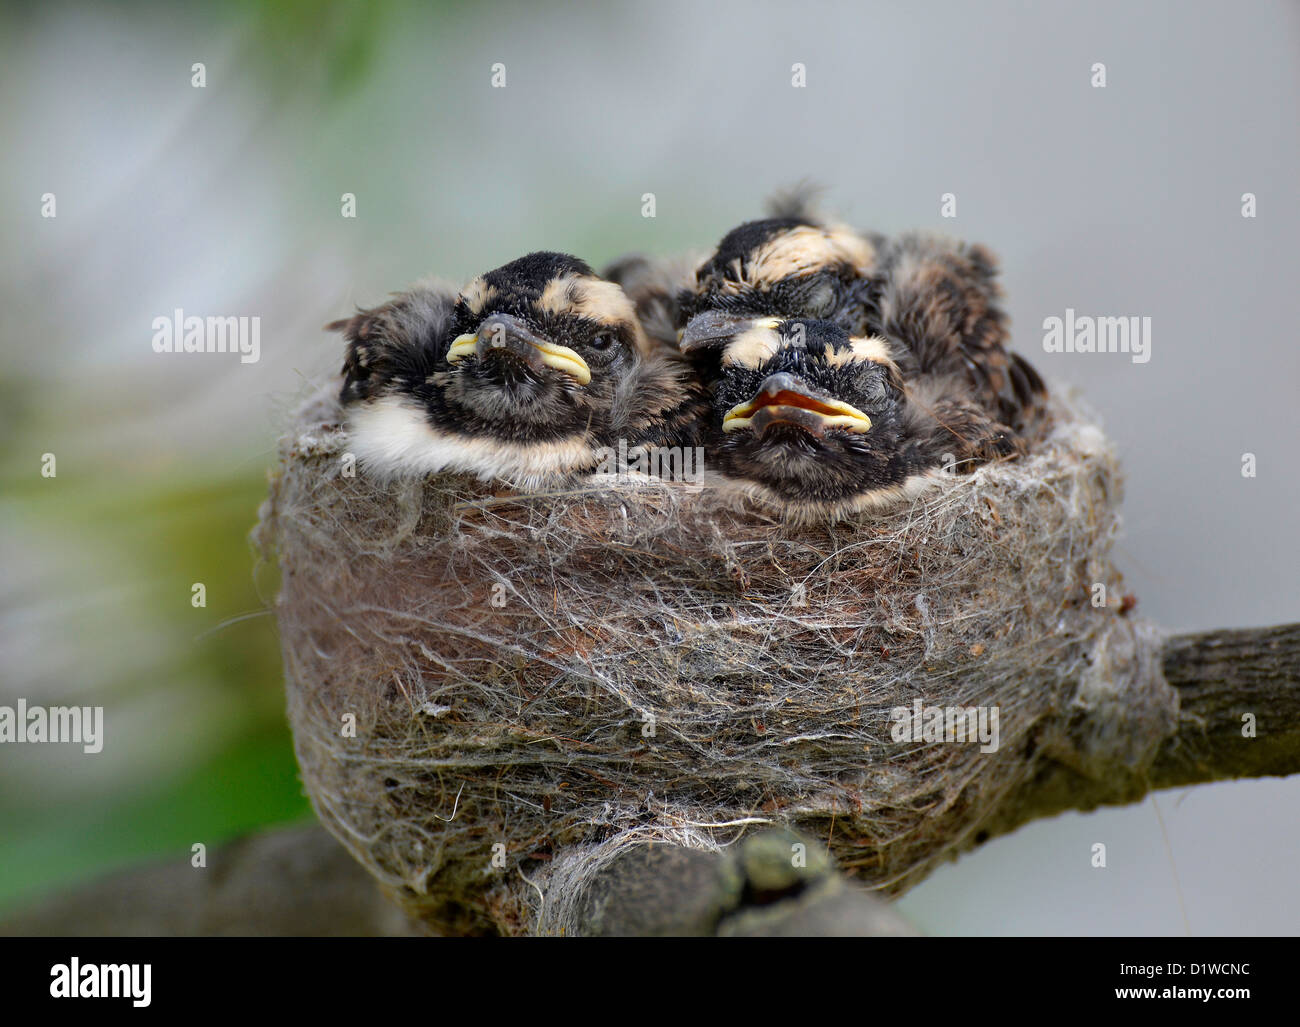 Nest of baby Willy Wagtail, black and white fantails, Victoria, South Australia Stock Photo